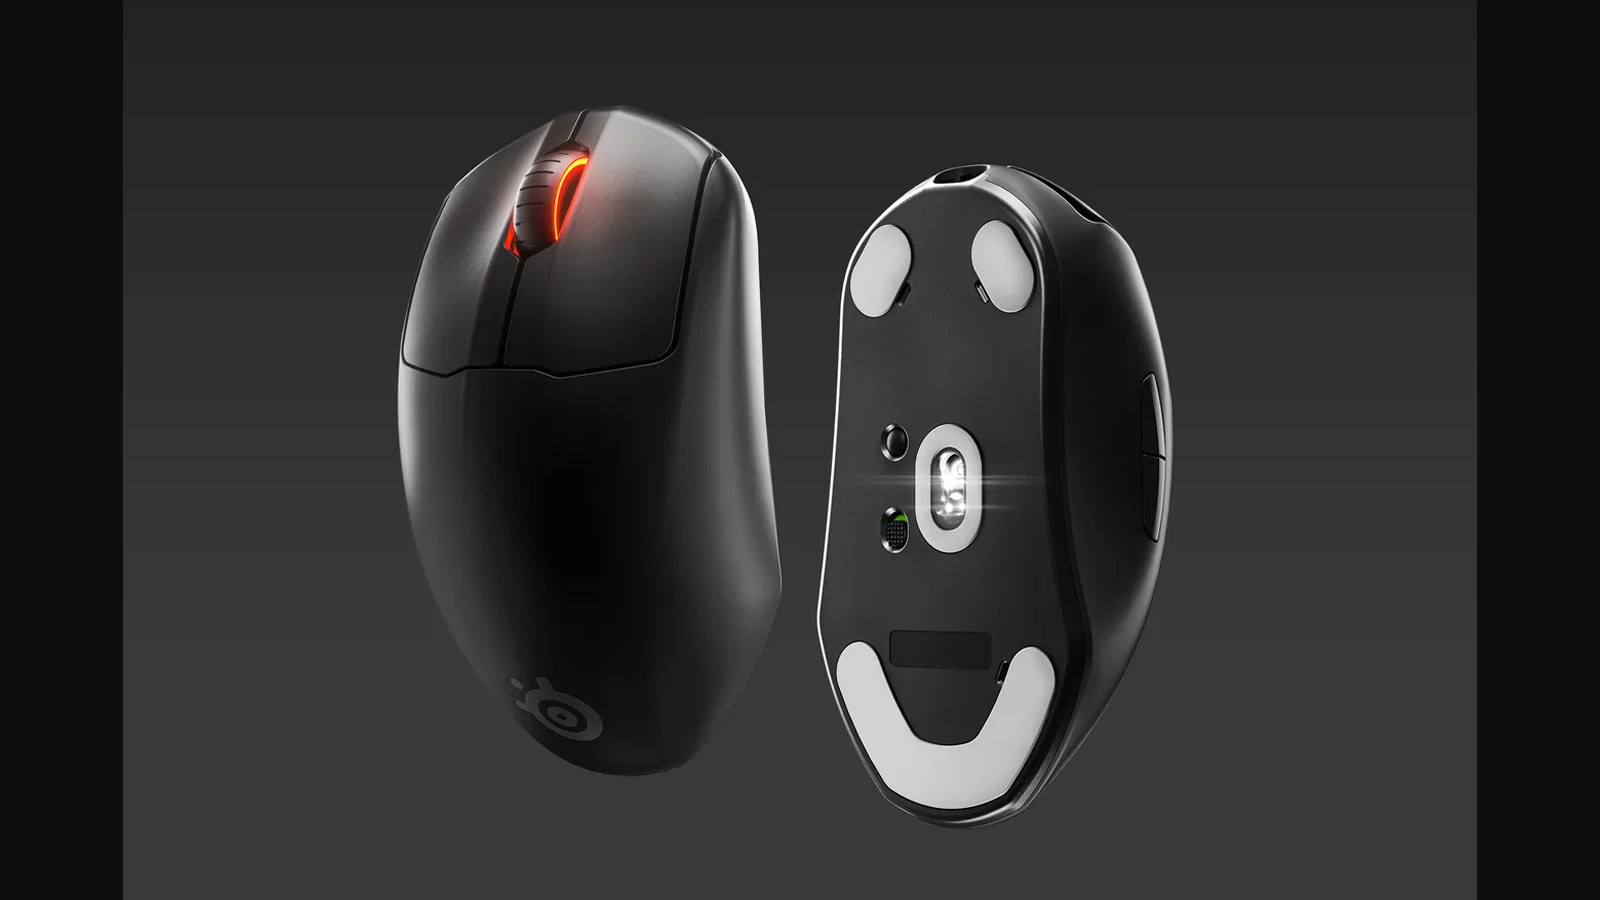 Chuột chơi game SteelSeries Prime